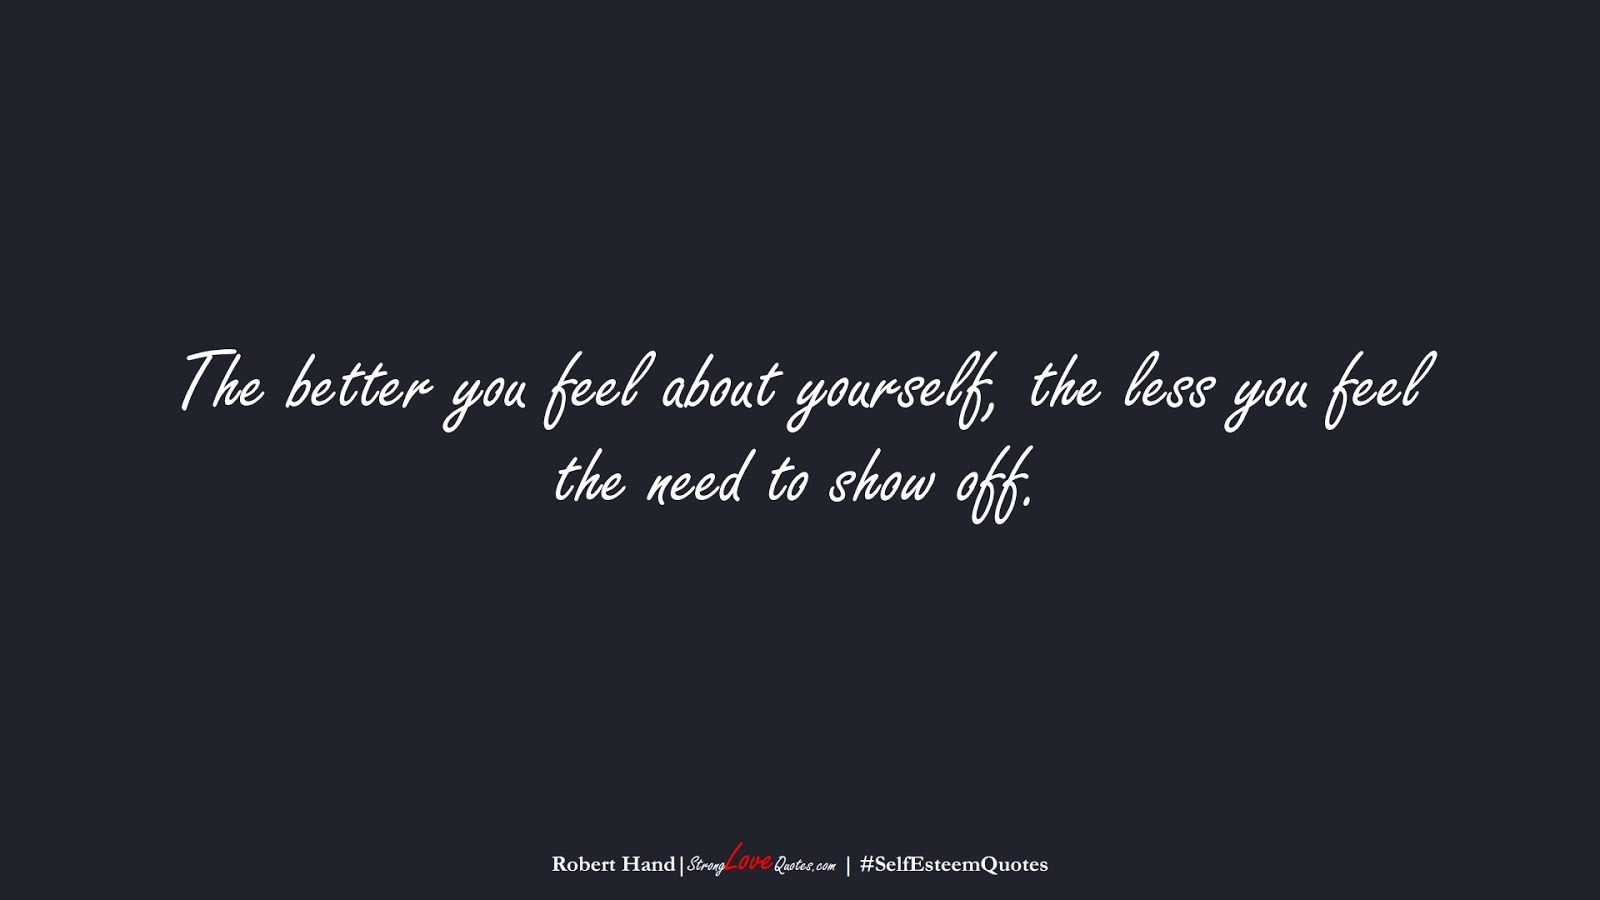 The better you feel about yourself, the less you feel the need to show off. (Robert Hand);  #SelfEsteemQuotes